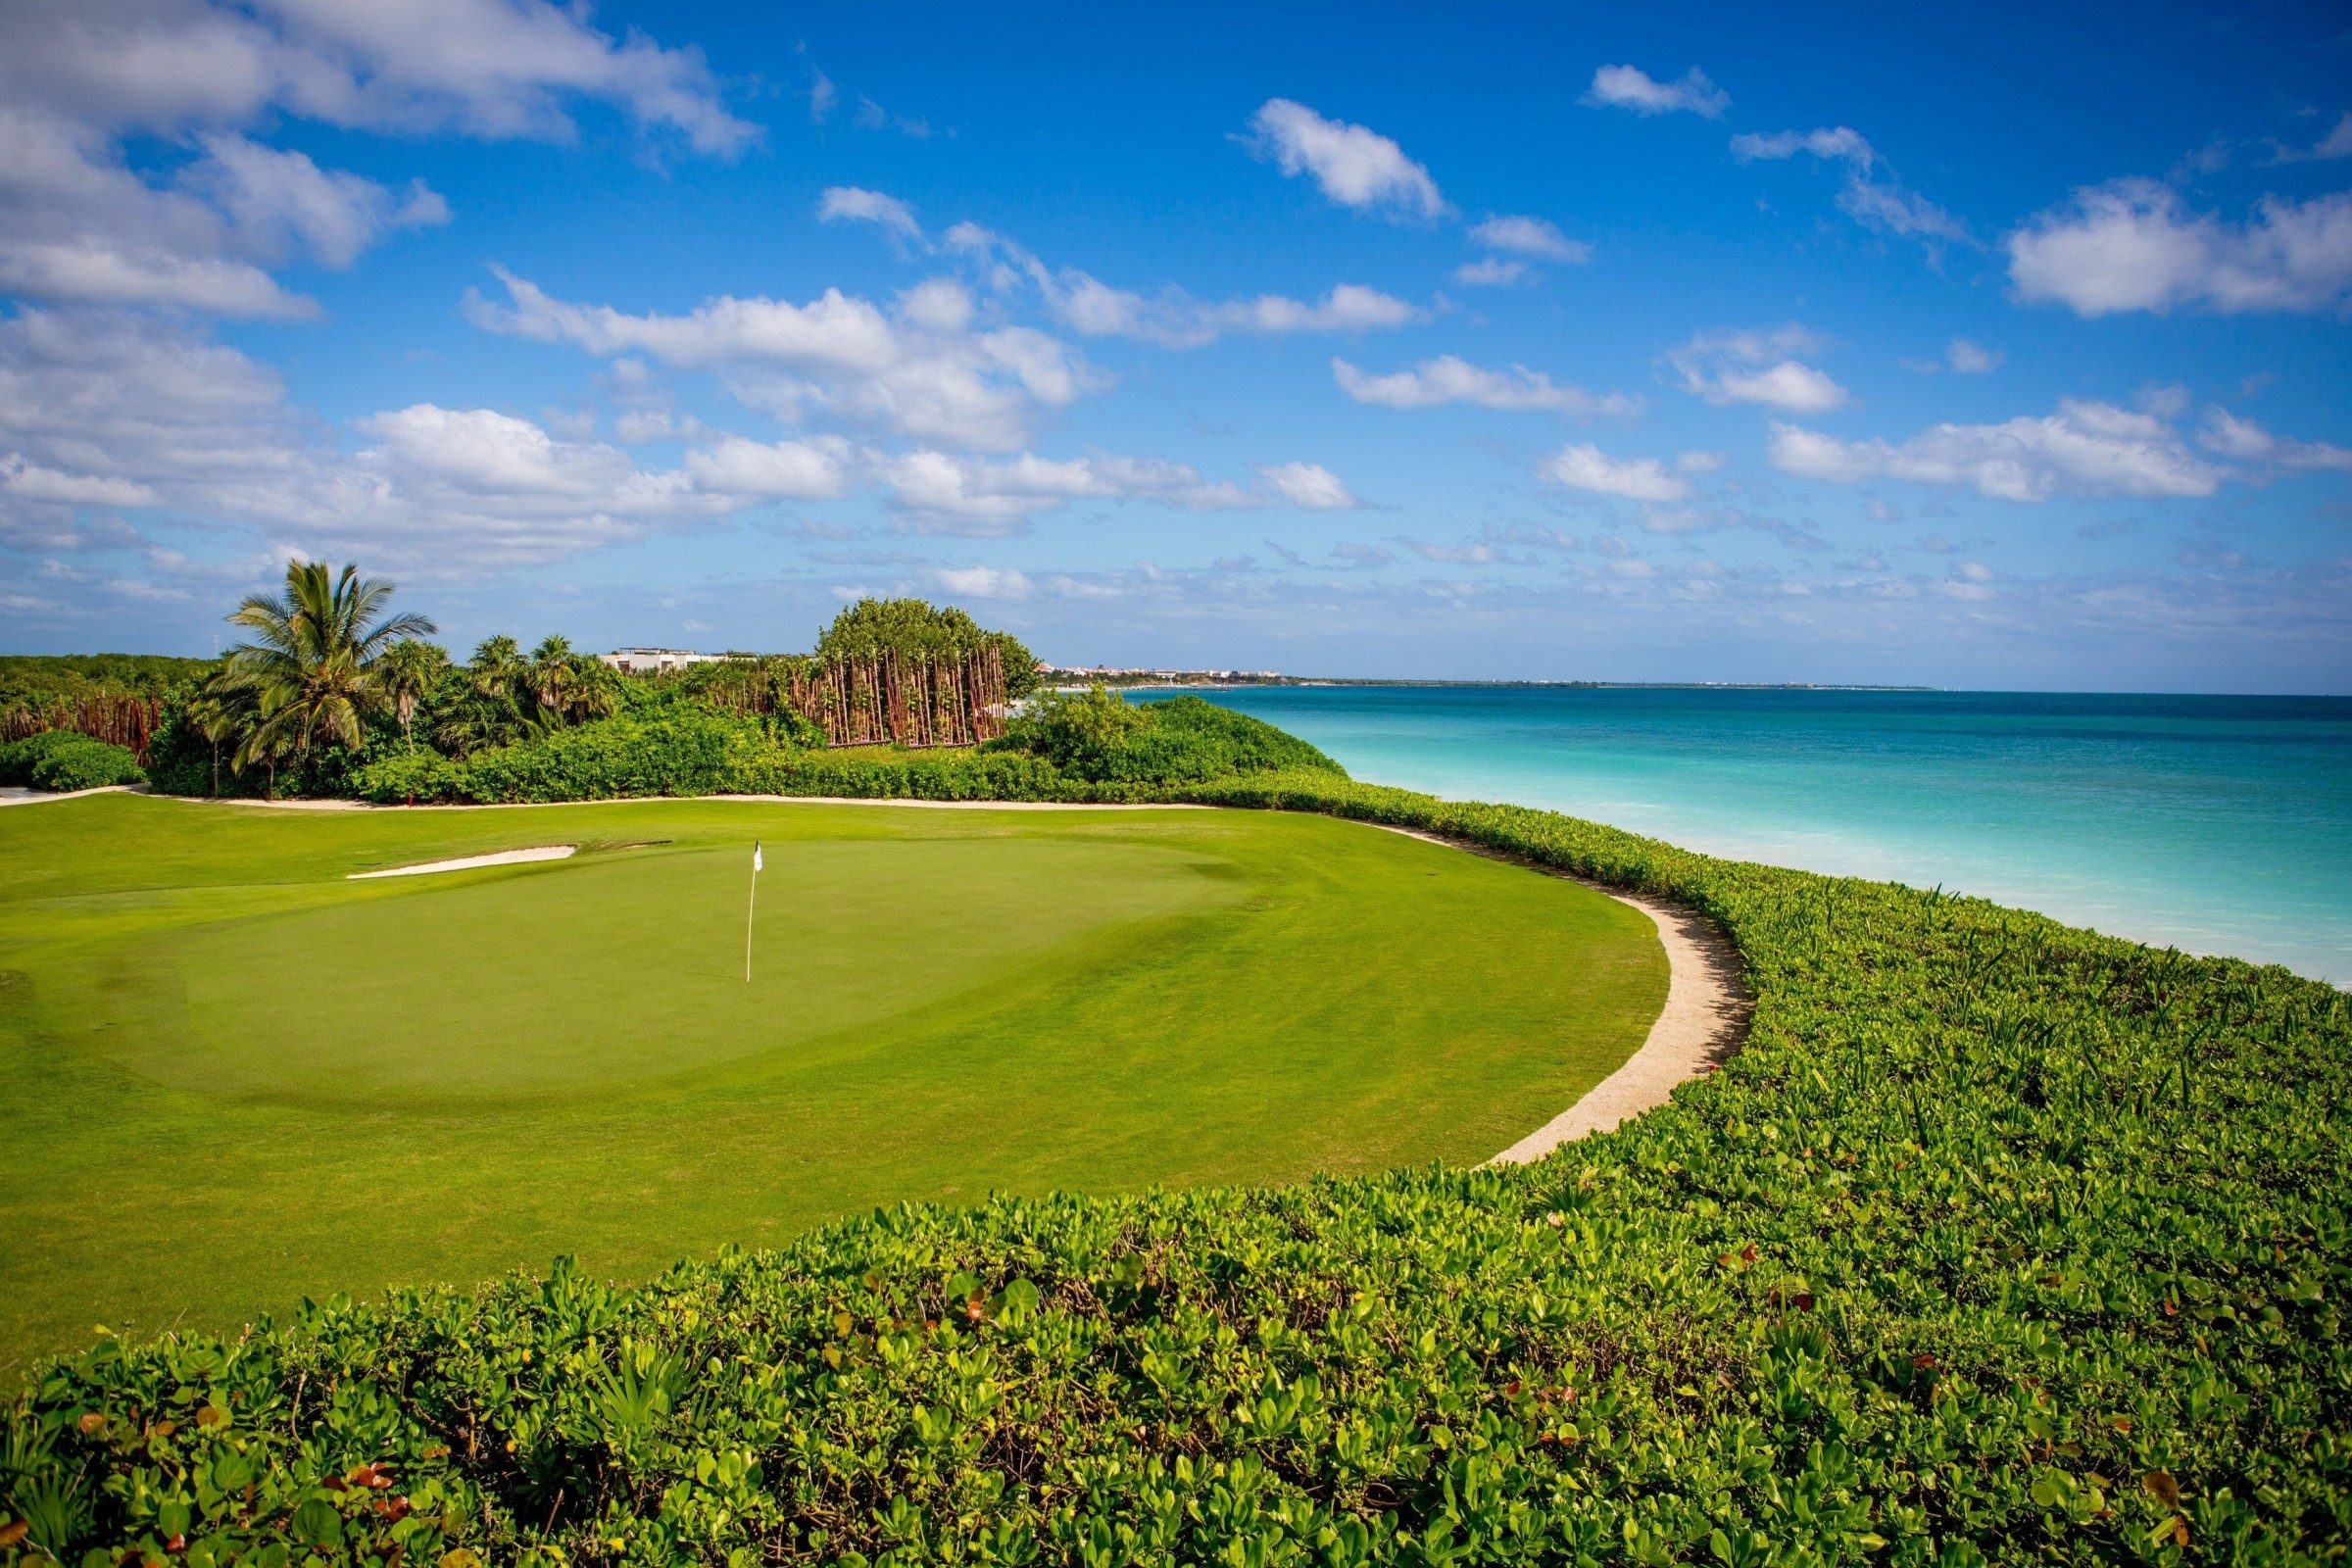 The Most Unique Golf Courses in the World